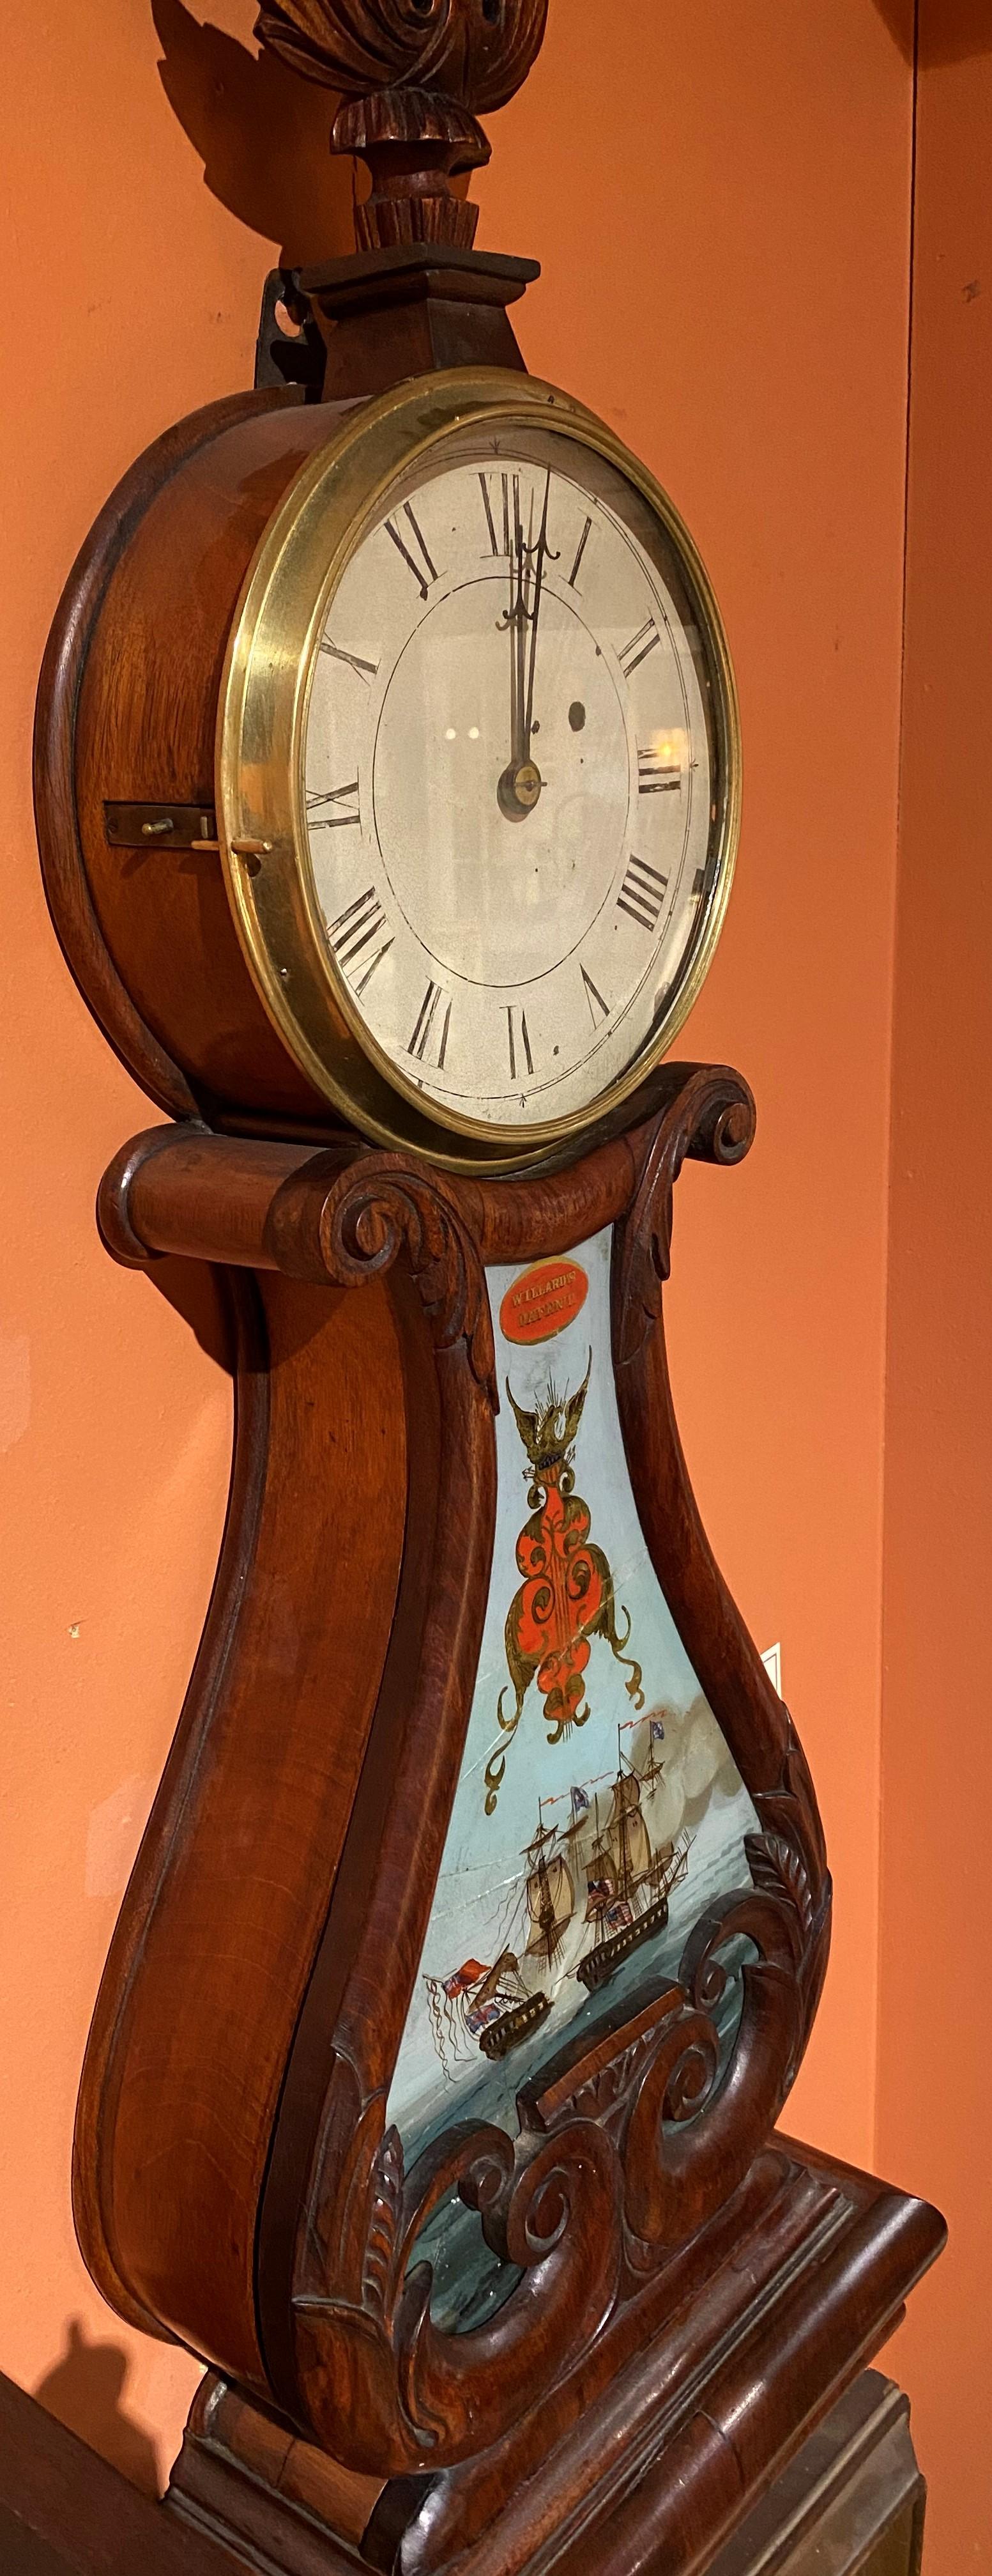 Hand-Carved Aaron Willard Lyre Clock in Mahogany Case w/ Battling Tall Ships Eglomise Panel